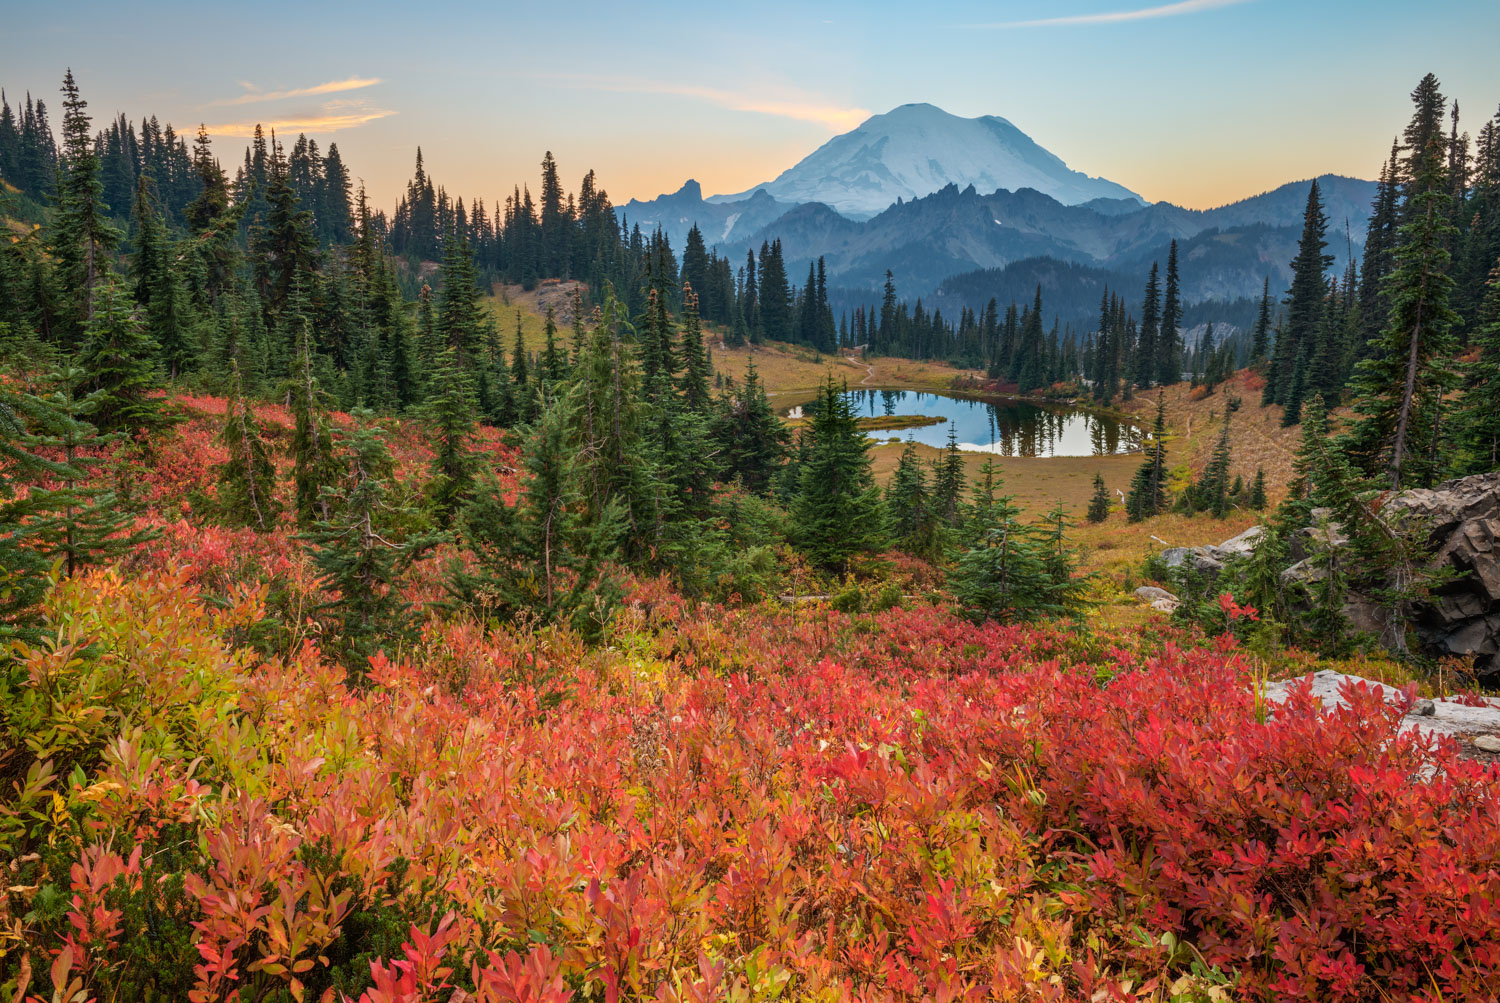 Autumn colors on hillside about Tipsoo Lake with Mount Rainier in the distance.